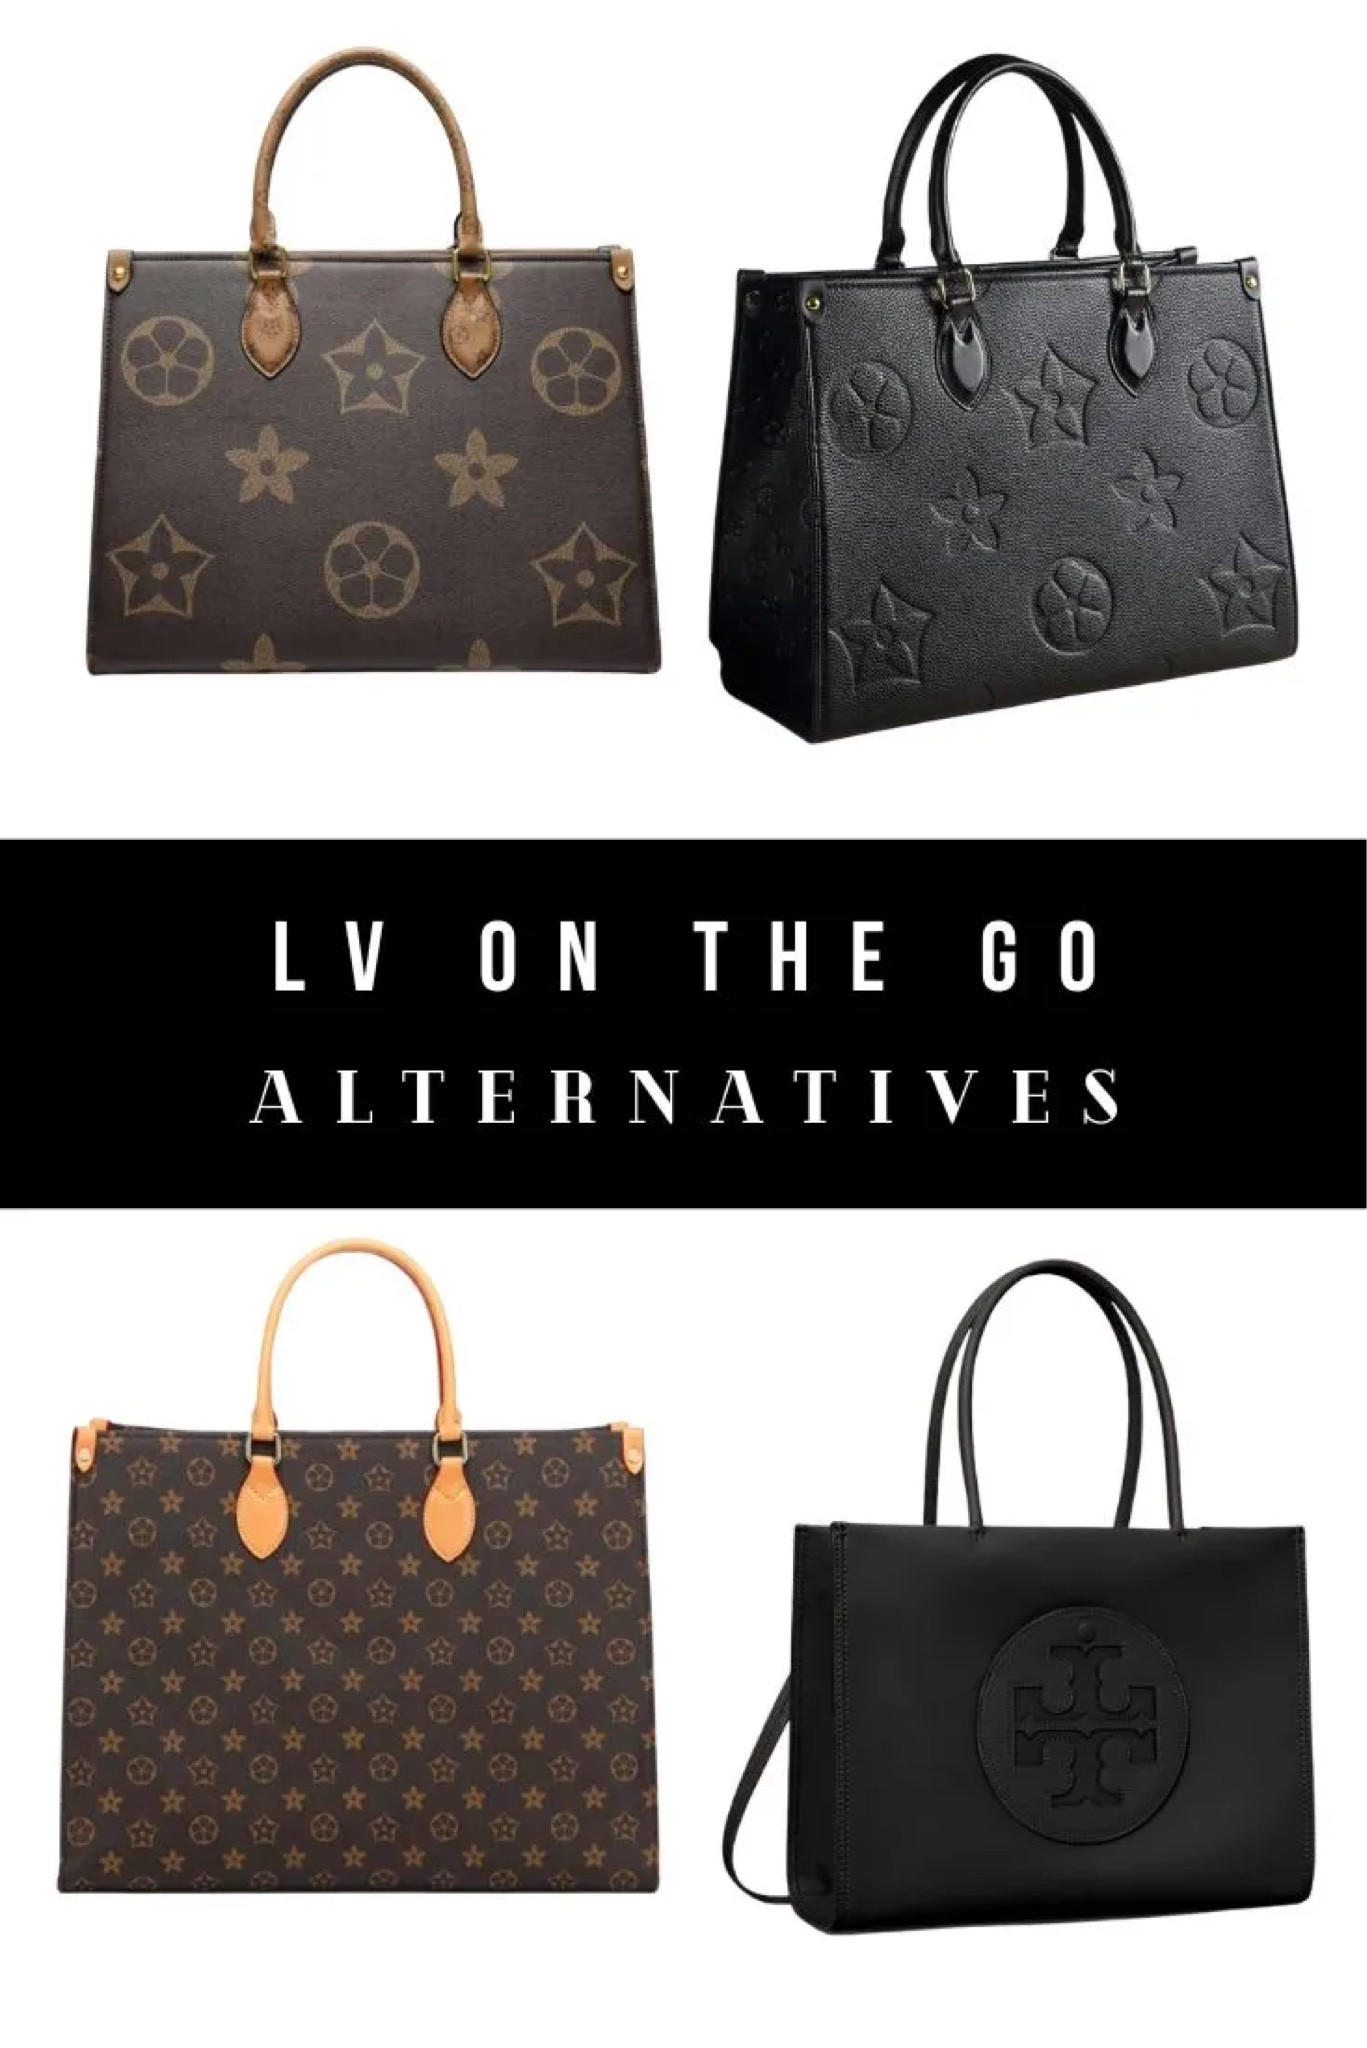 Louis Vuitton dupes, Lv lookalikes and LV alternatives